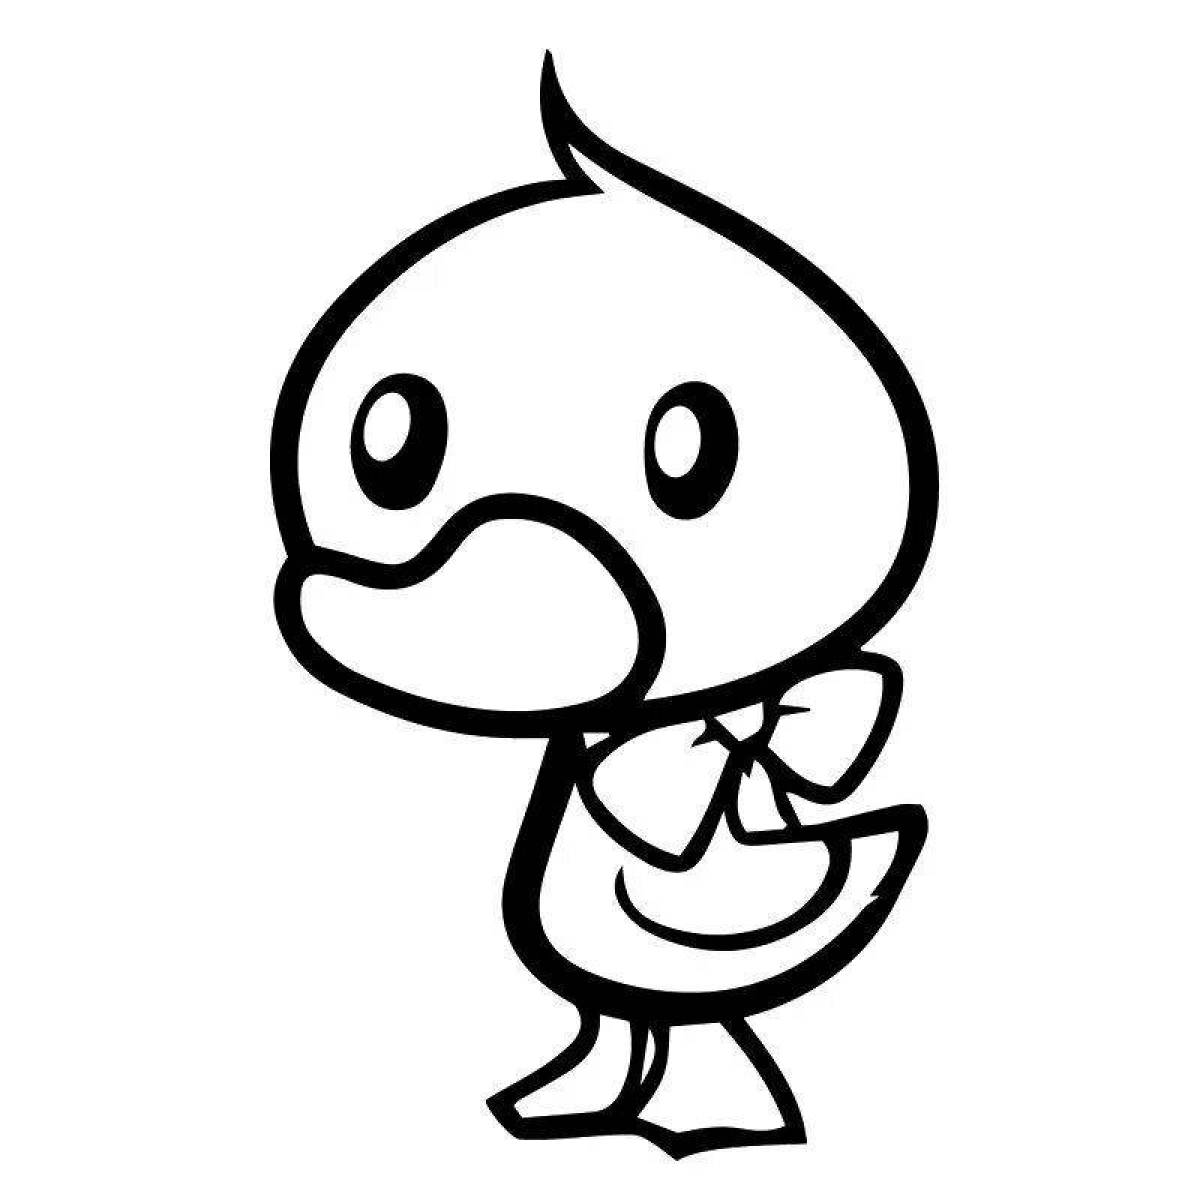 Lalafan gorgeous duck coloring page